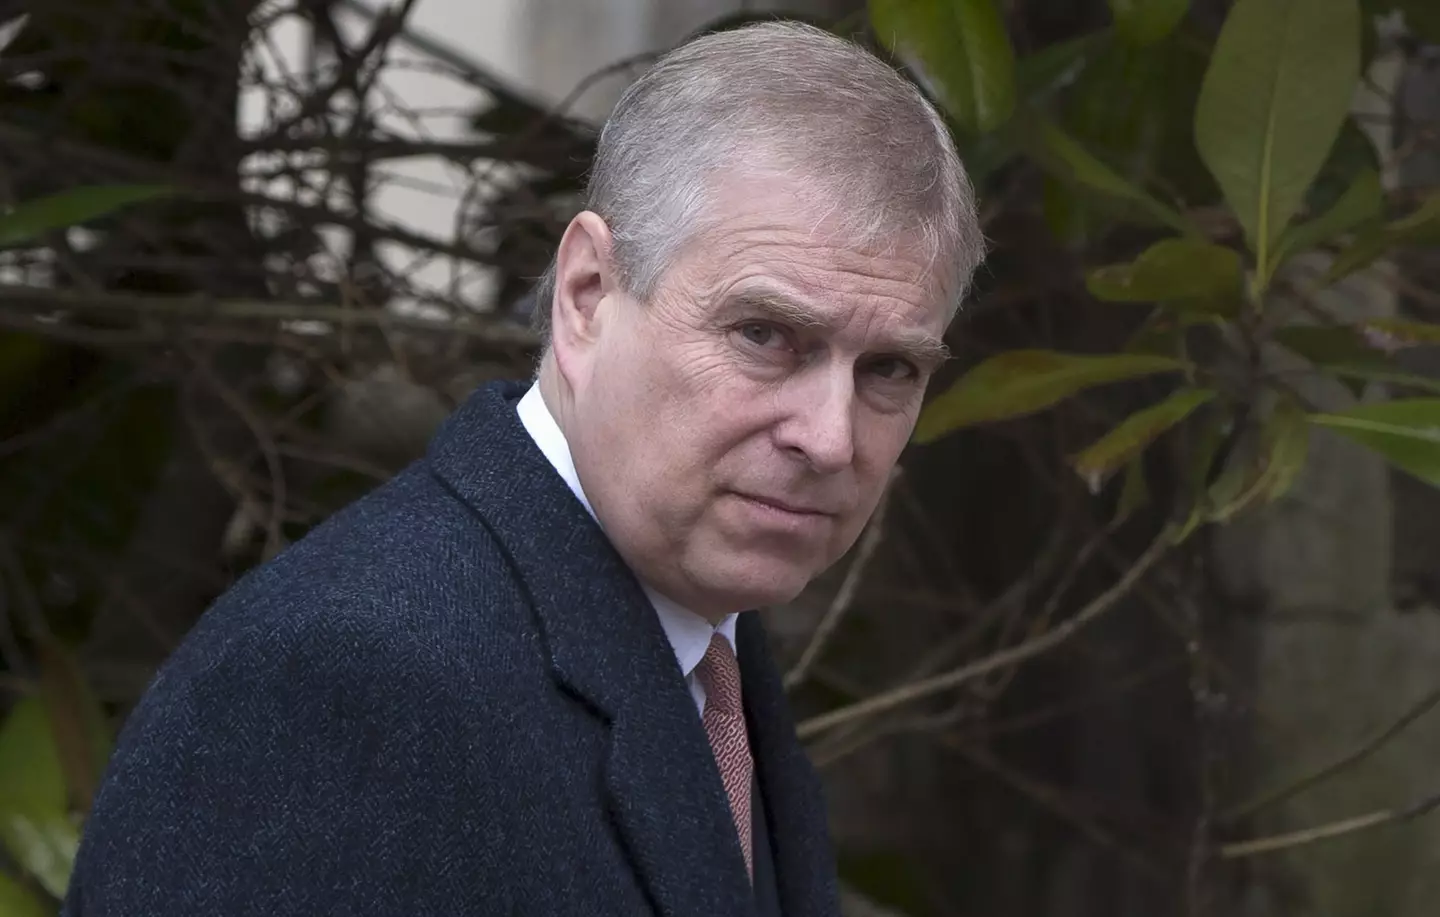 Prince Andrew has settled out of court (